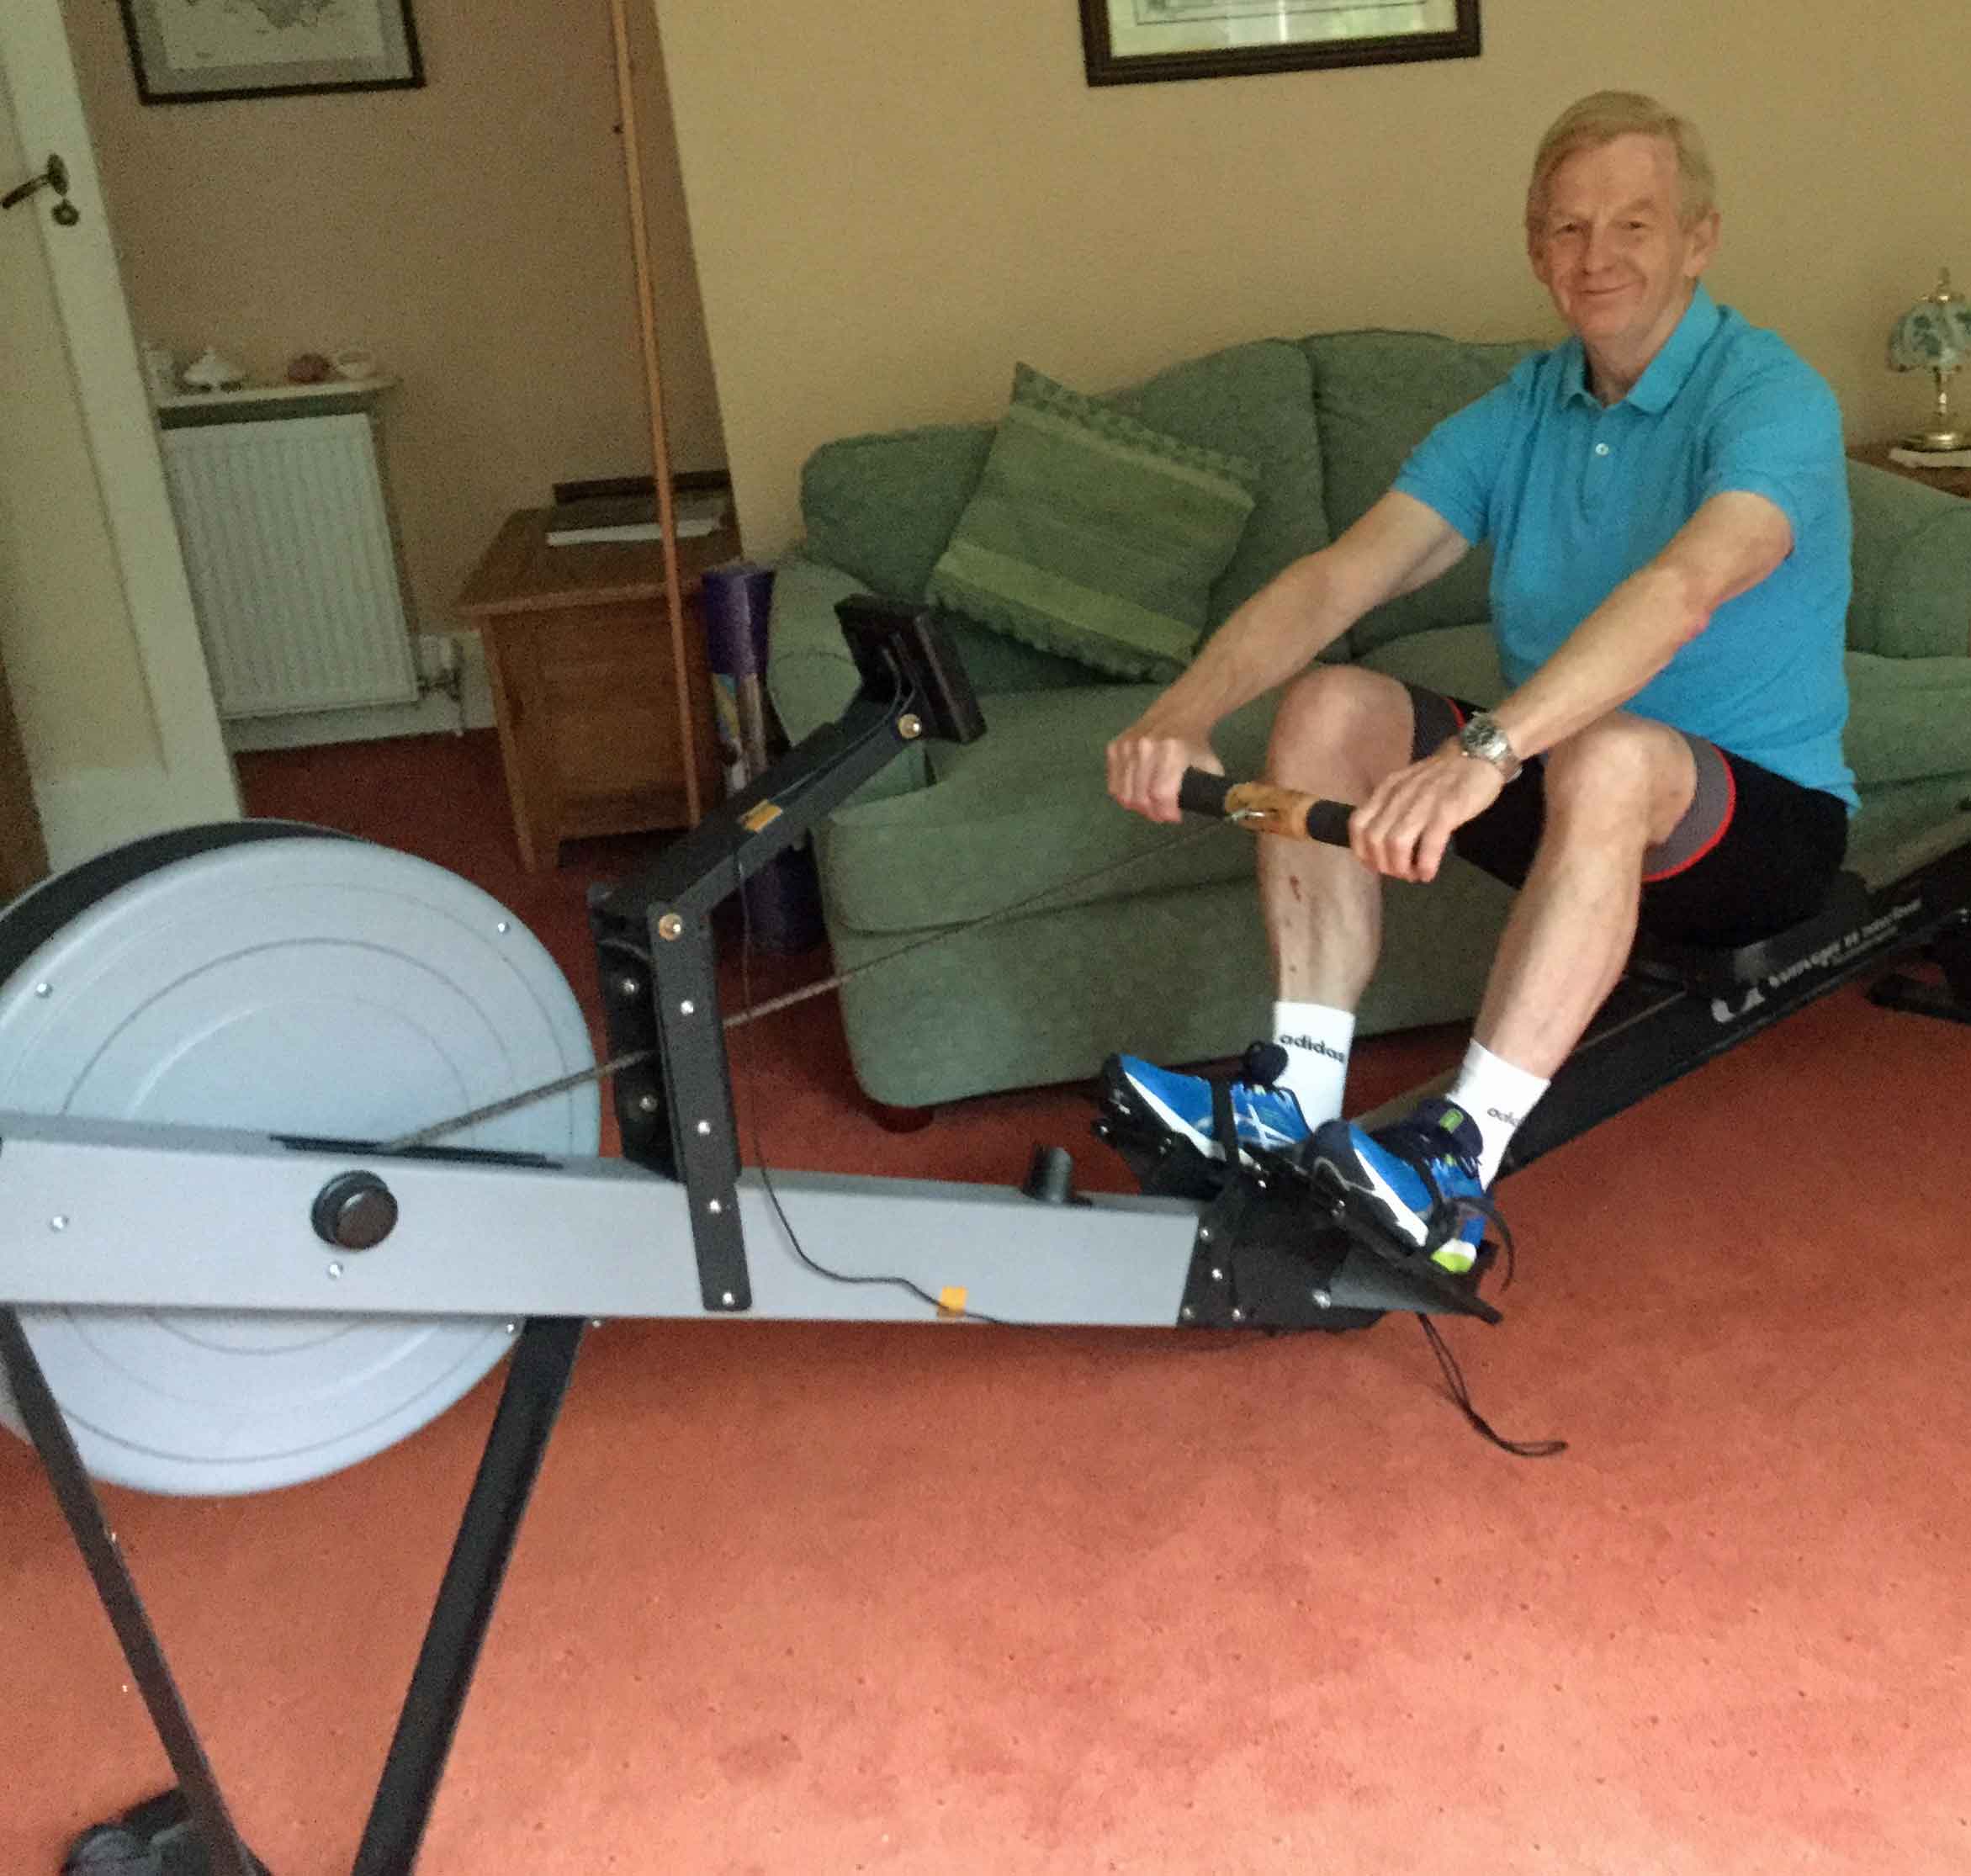 David Russell rows the miles in his living room 